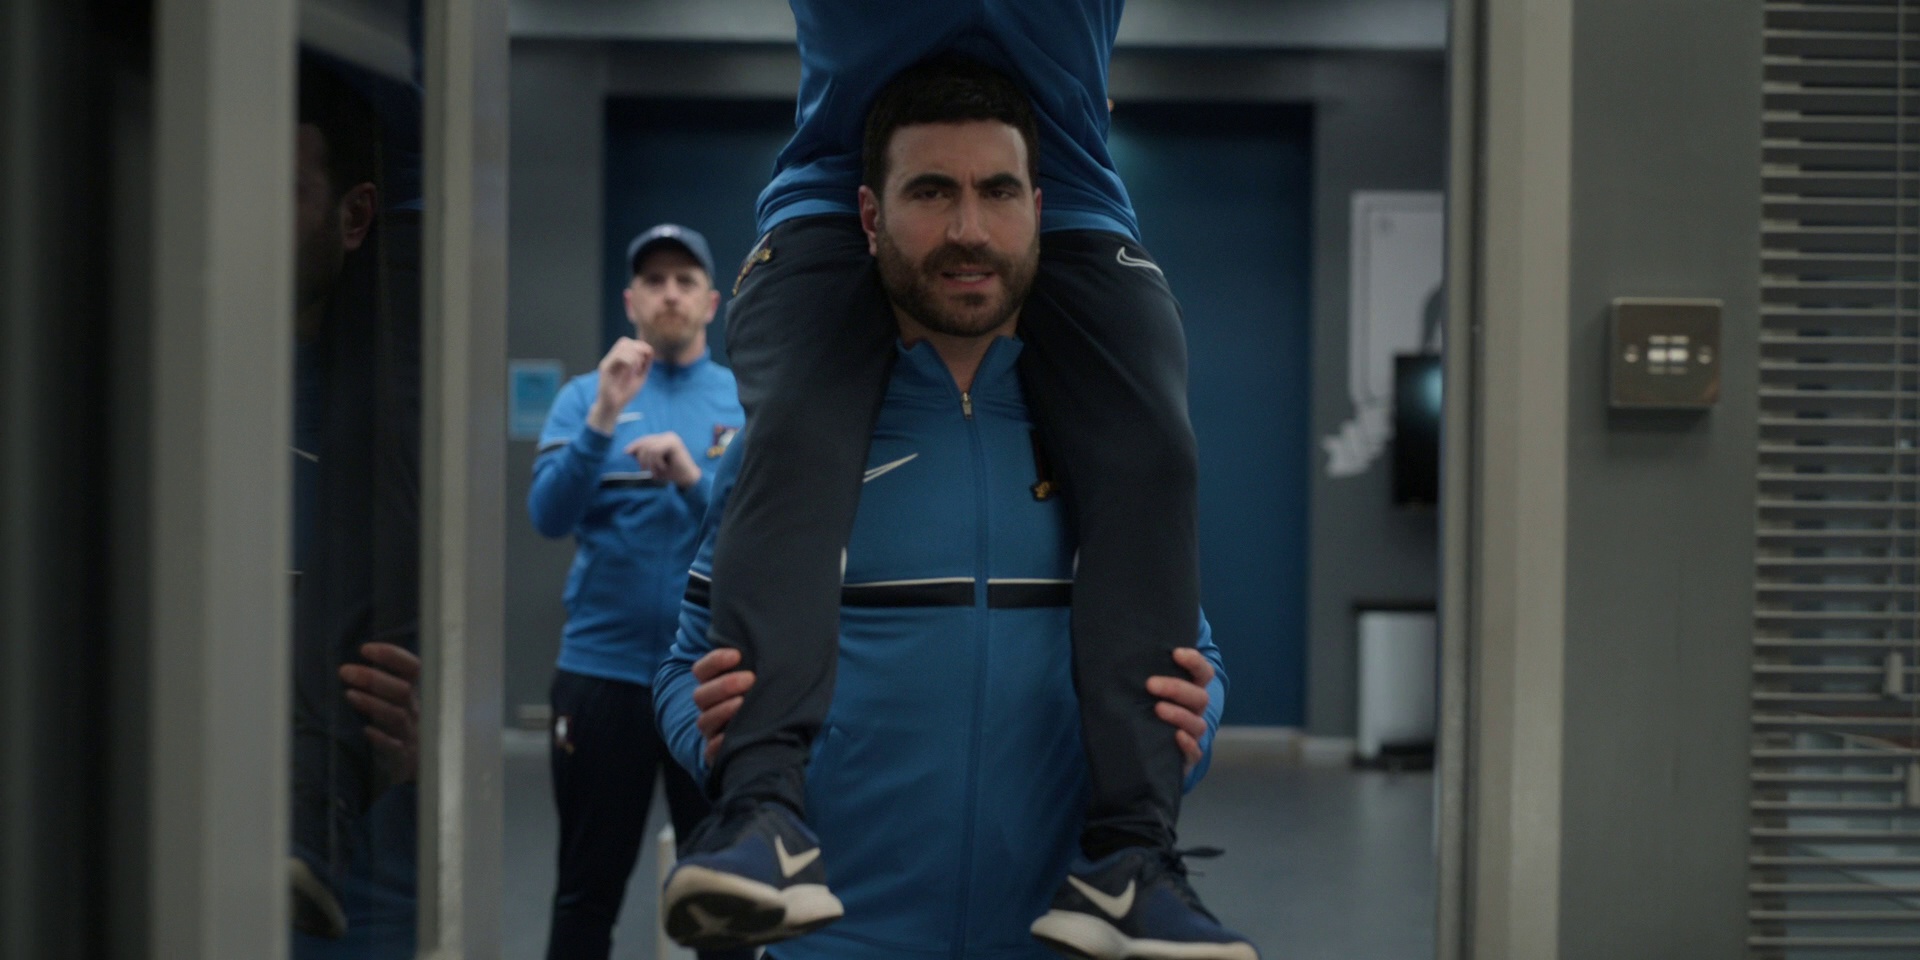 Nike Clothes And Shoes In Ted Lasso S03E12 